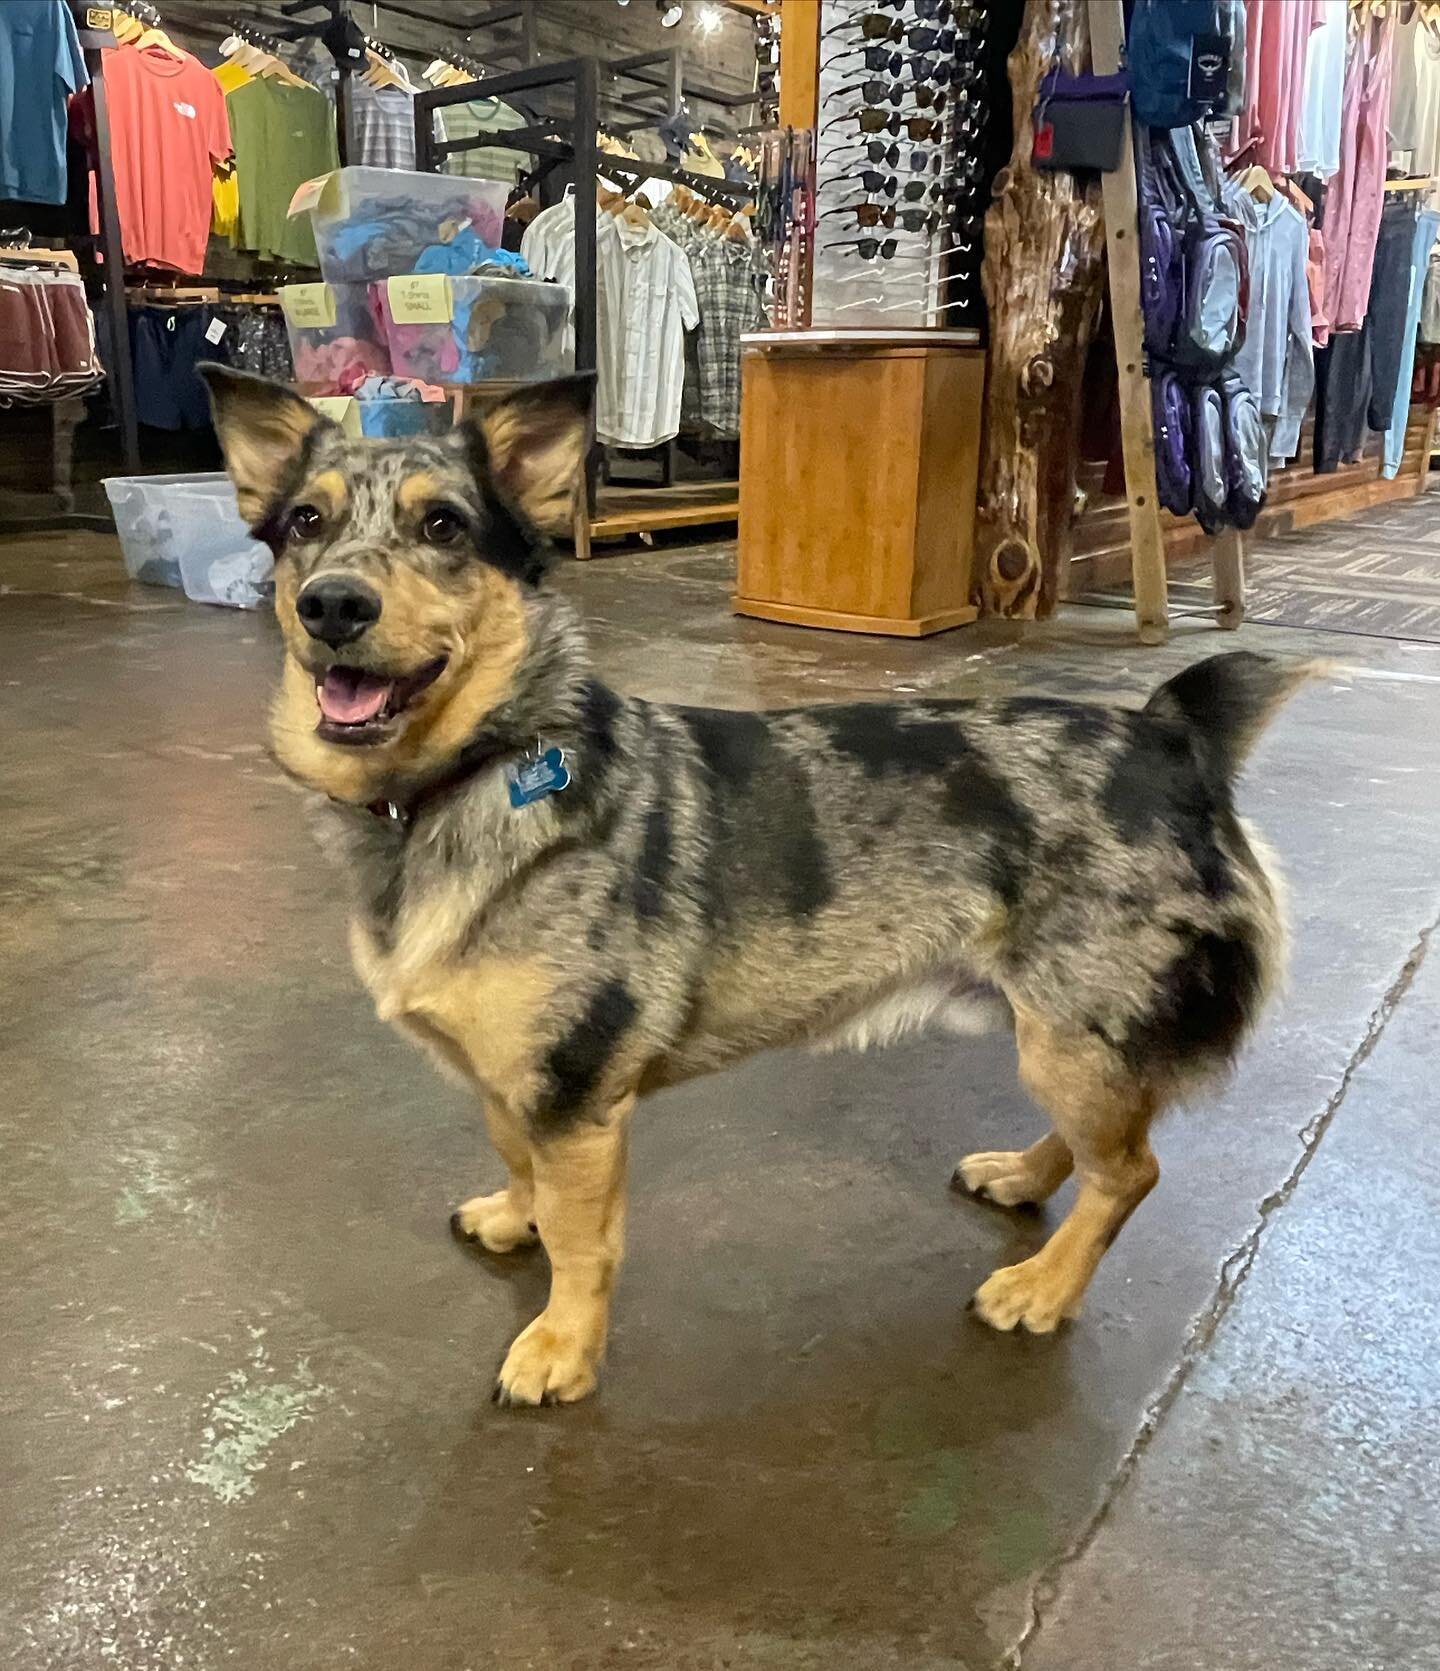 Kimber can&rsquo;t wait to see you guys!! Come see him (and us) this weekend, we&rsquo;ll be operating at normal store hours all through Labor Day!

#getoutanddostuff #shoplocal #reachyourpeak